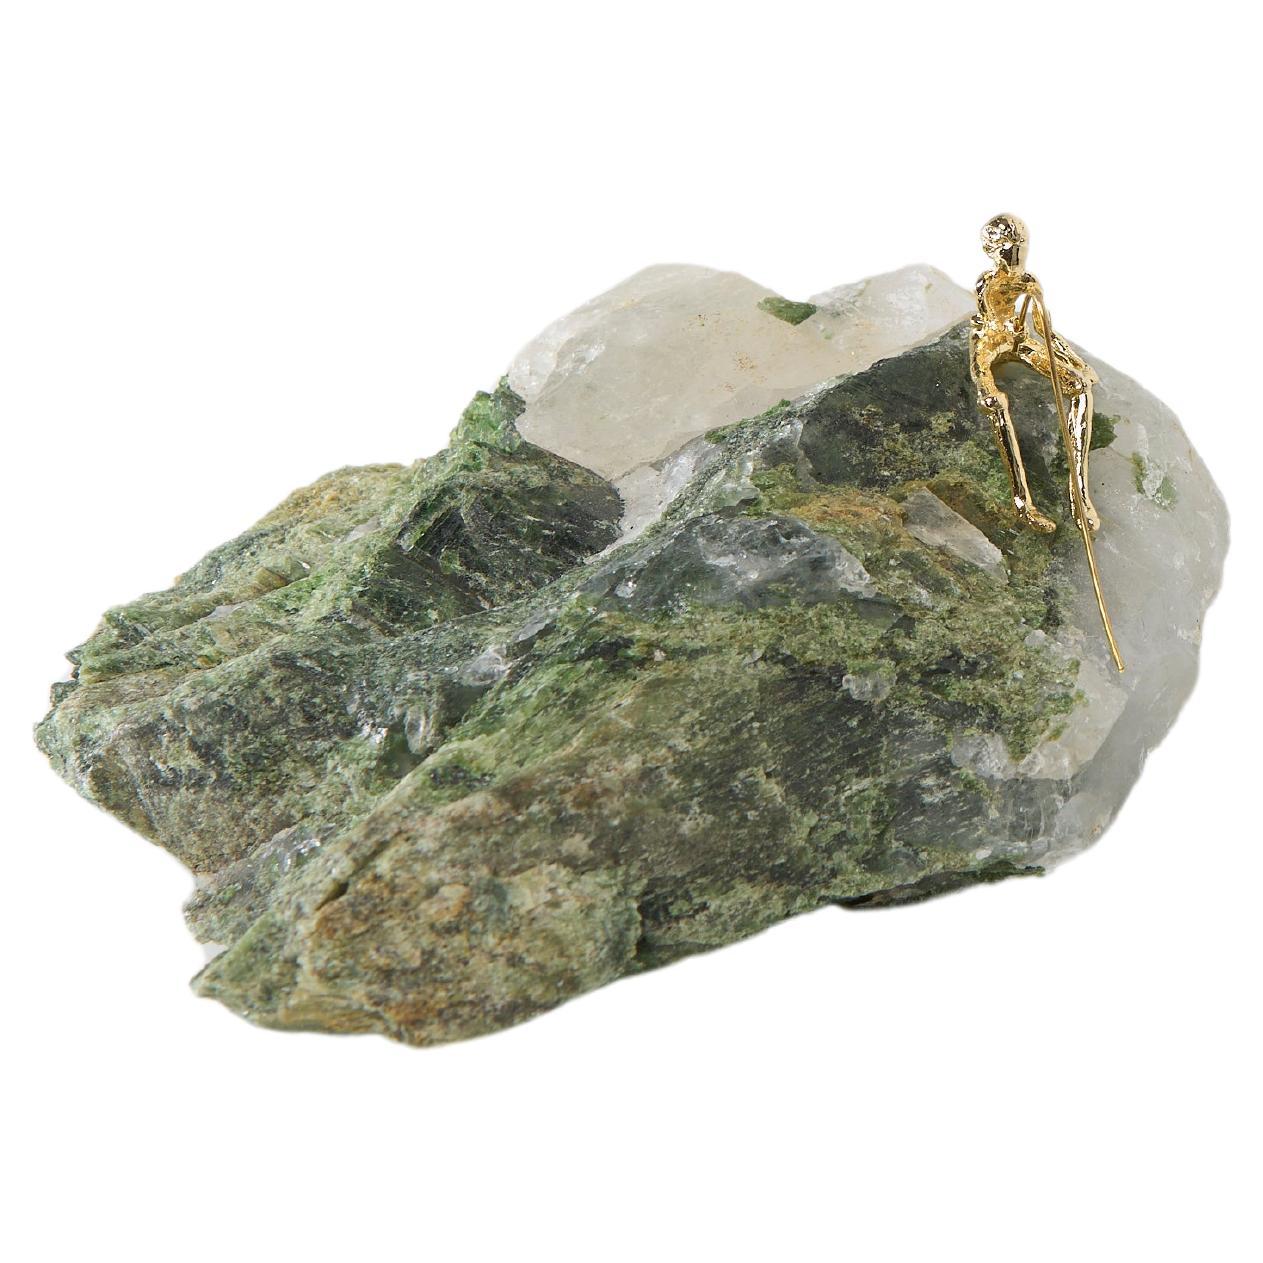 Pescador Series, N832 Diopside Fisherman Table Sculpture For Sale